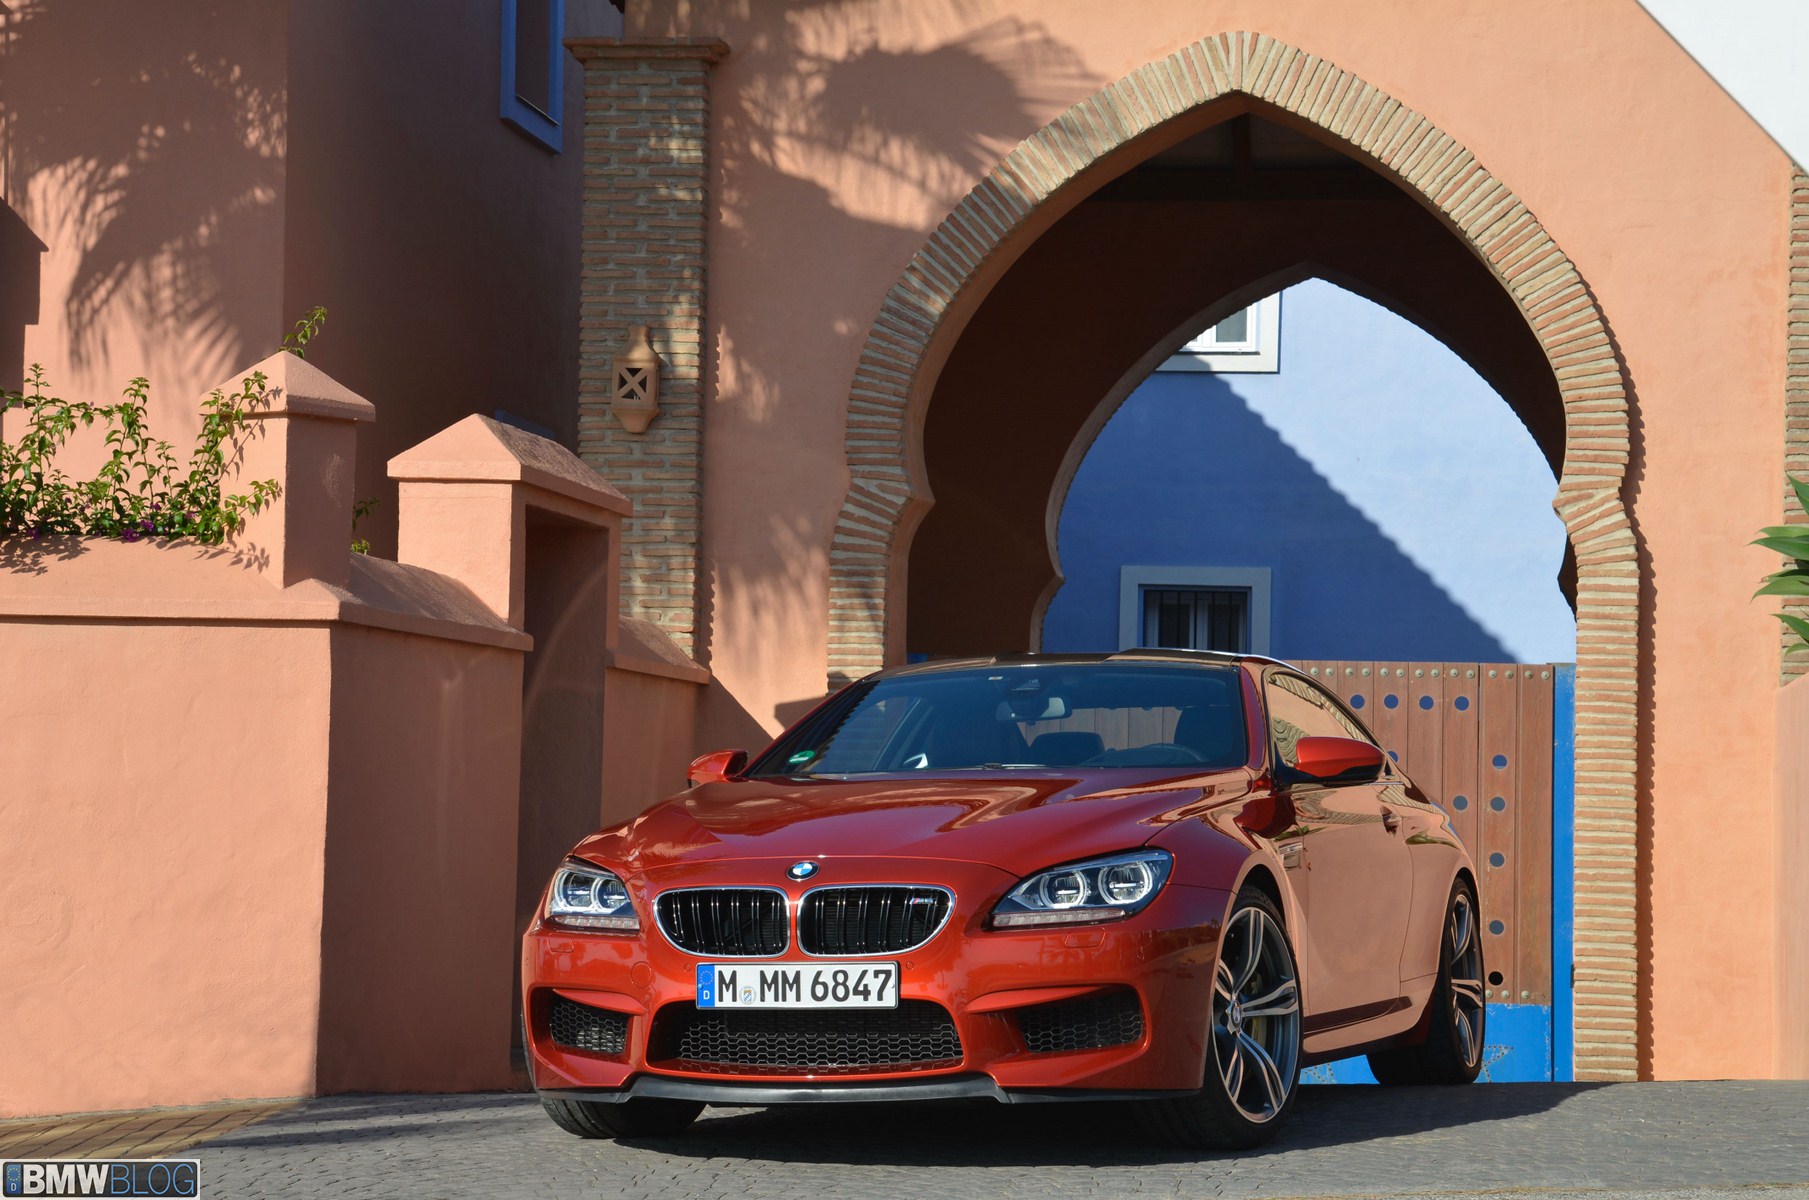 2013 BMW M6 Coupe F13 front view